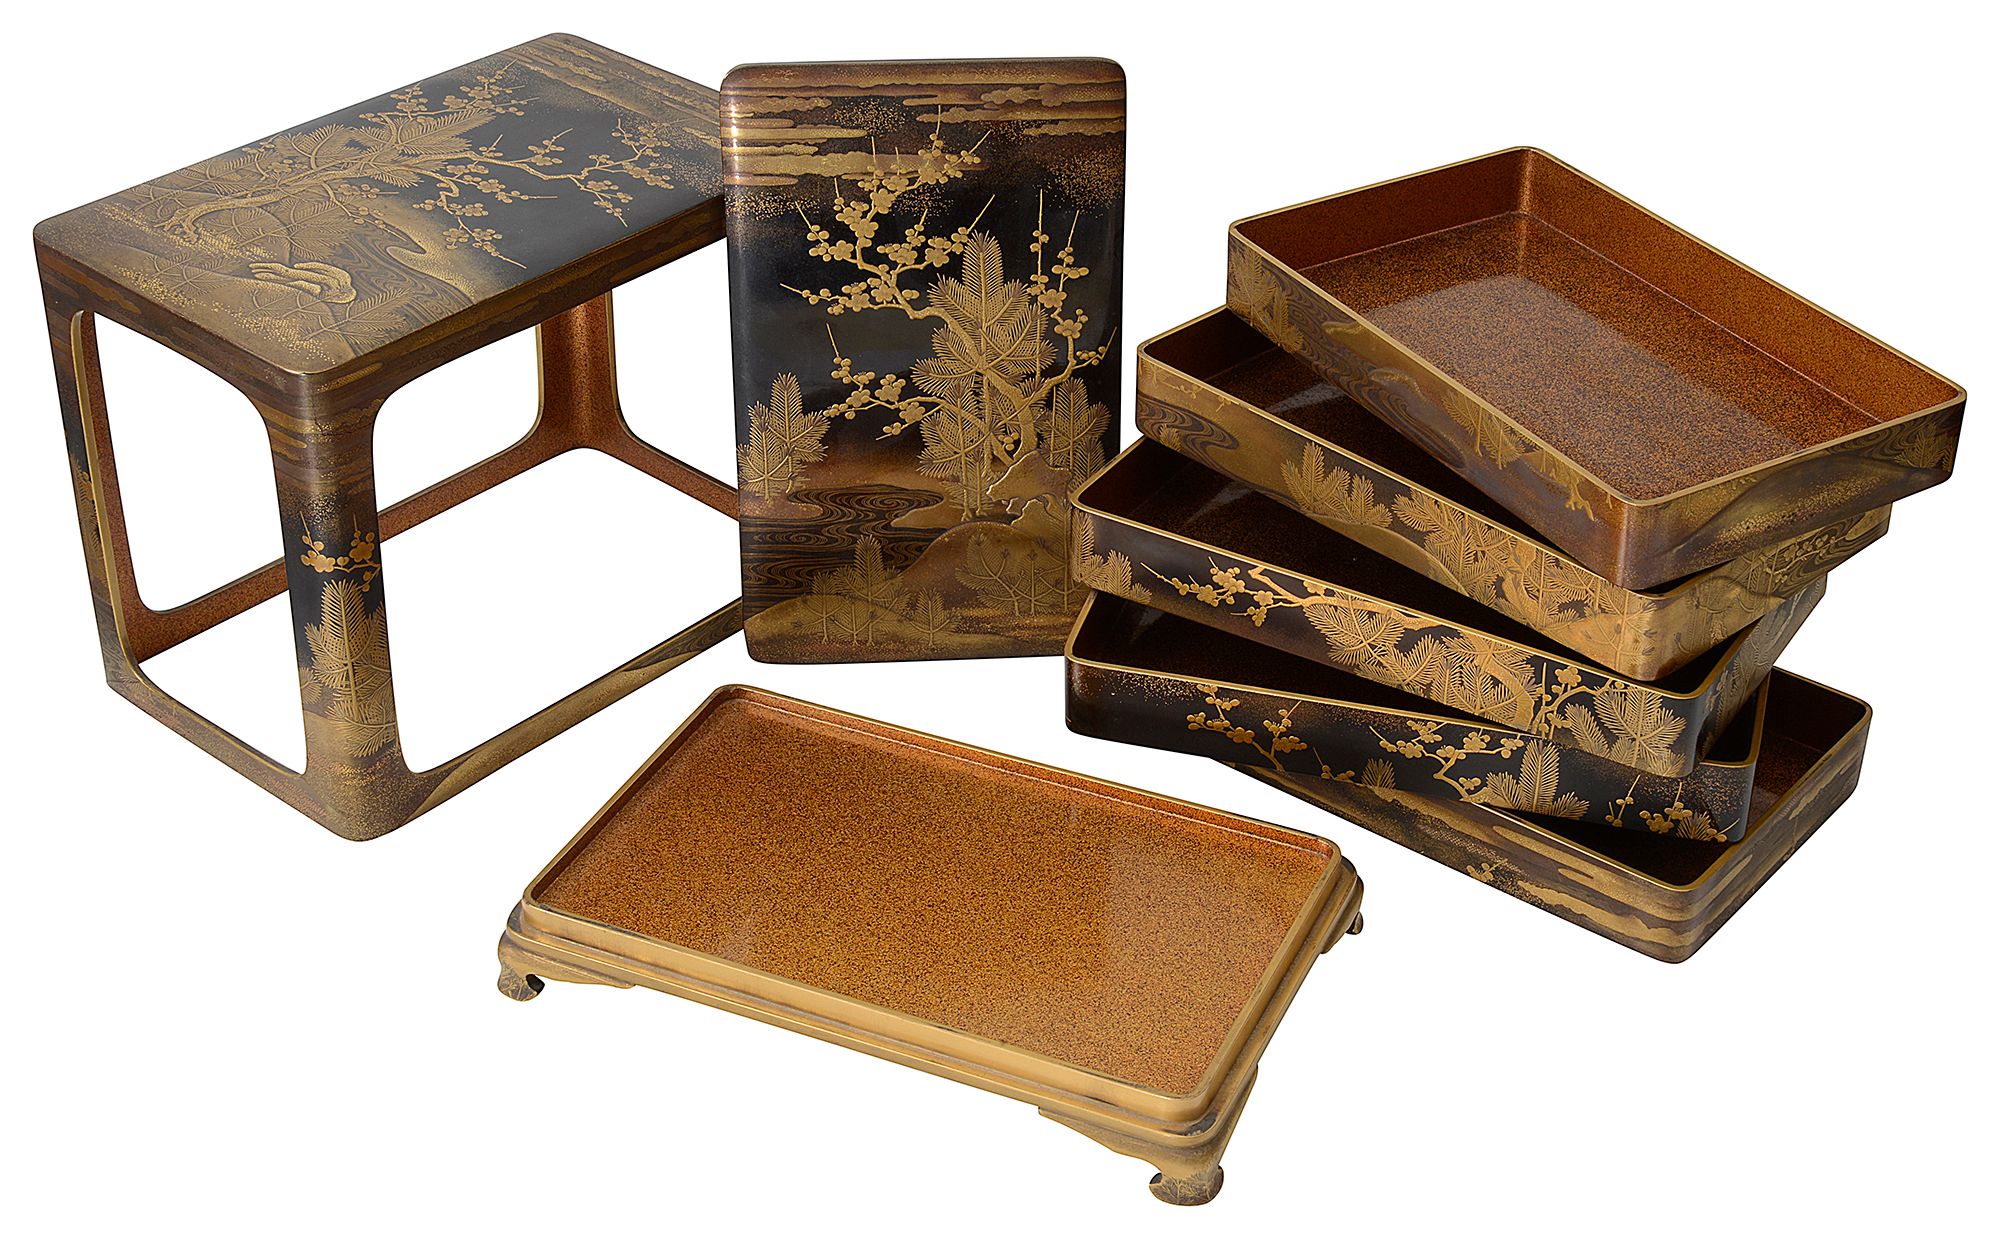 A 19th C Japanese lacquer (Ju-Kobako) four tiered box, cover and stand - Image 3 of 7